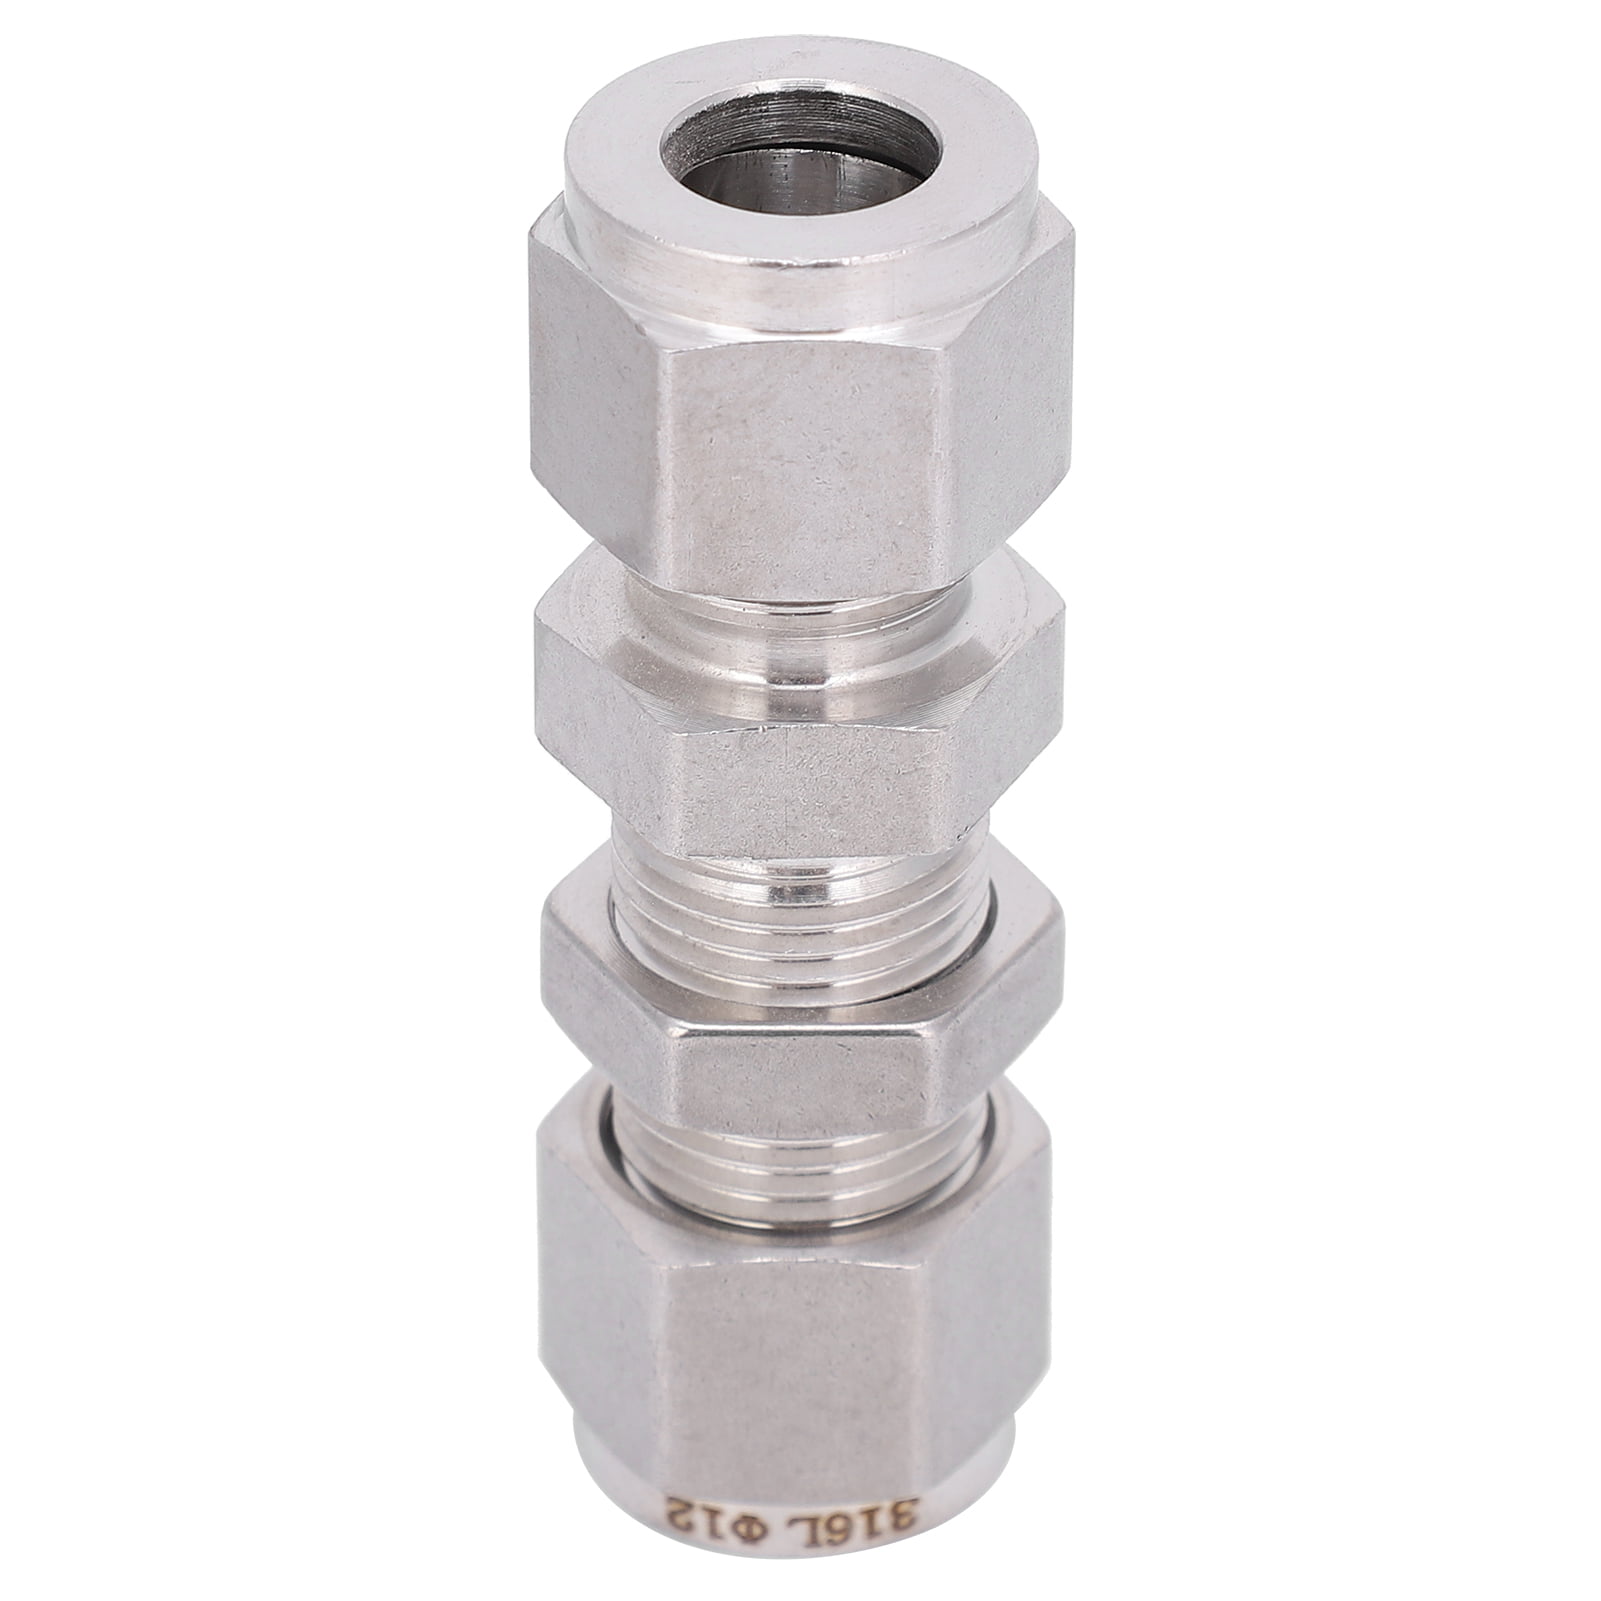 316 Stainless Steel Double Ferrule Compression Fitting Bulkhead Connector Accessory for Water Pipes Gas Pipes and Oil Pipes Ф12